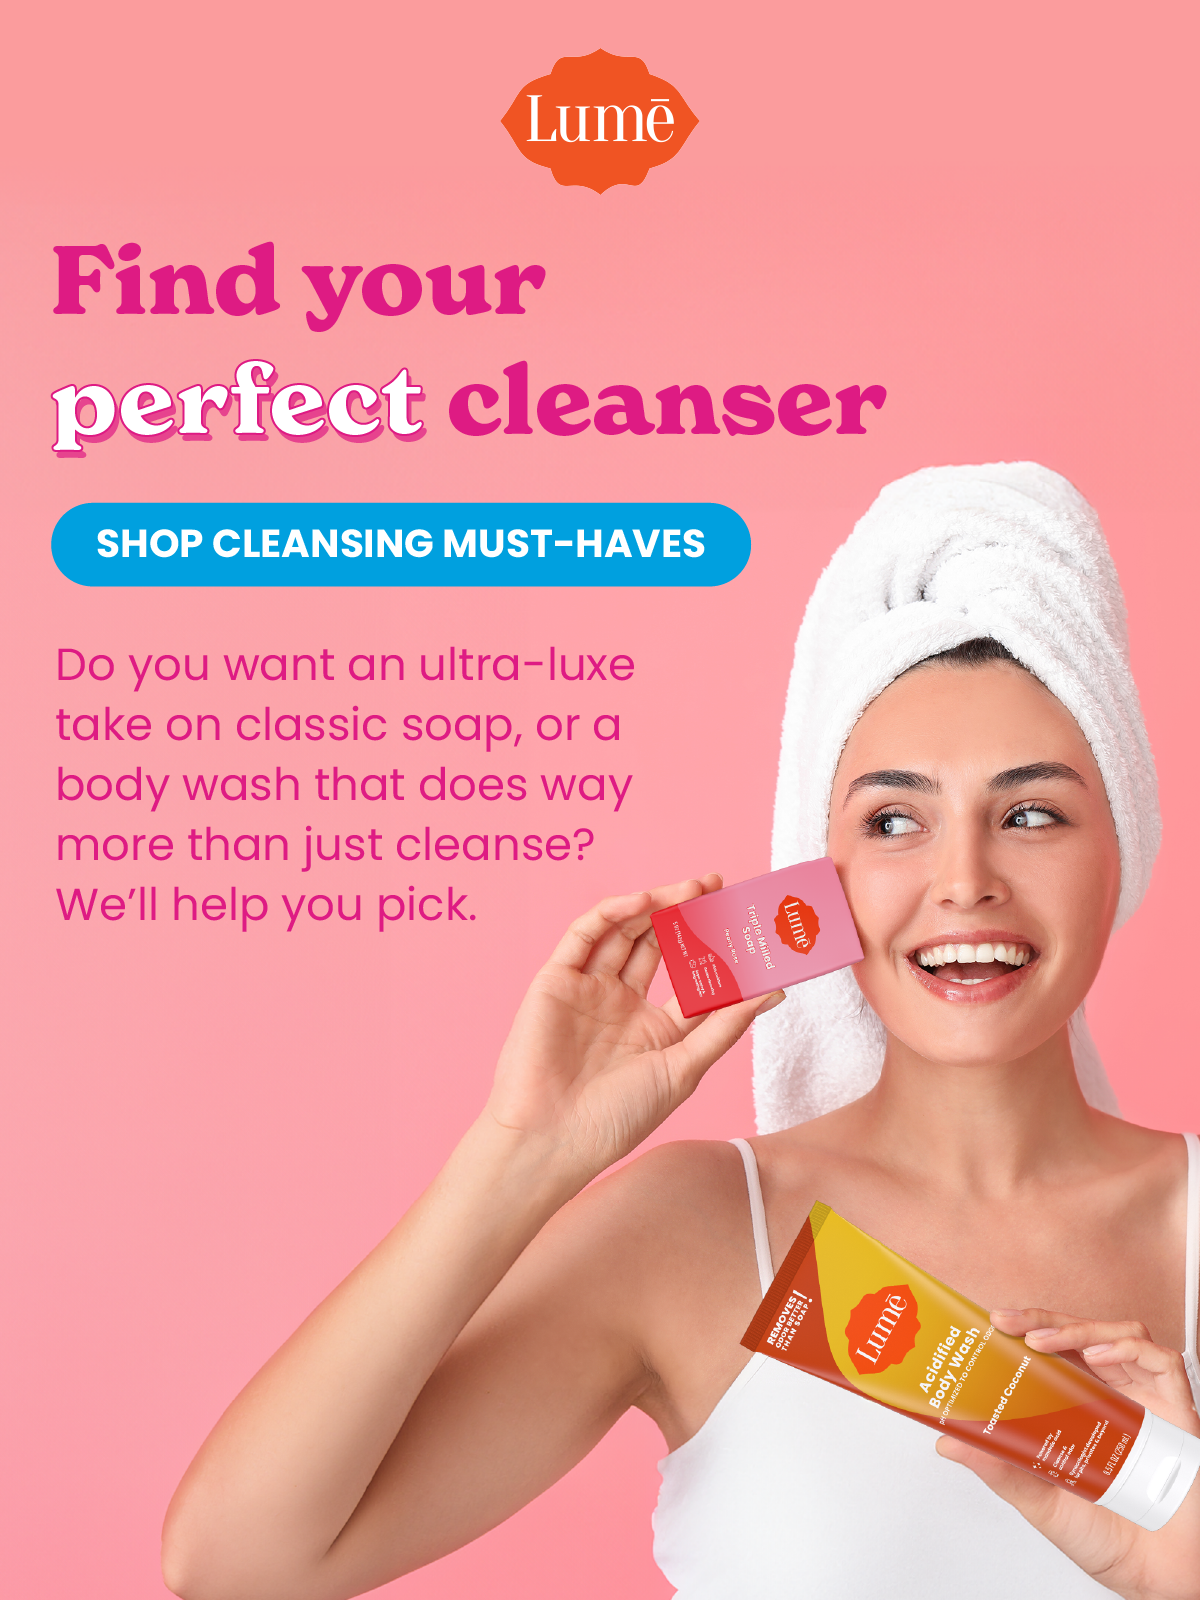 Find your perfect cleanser